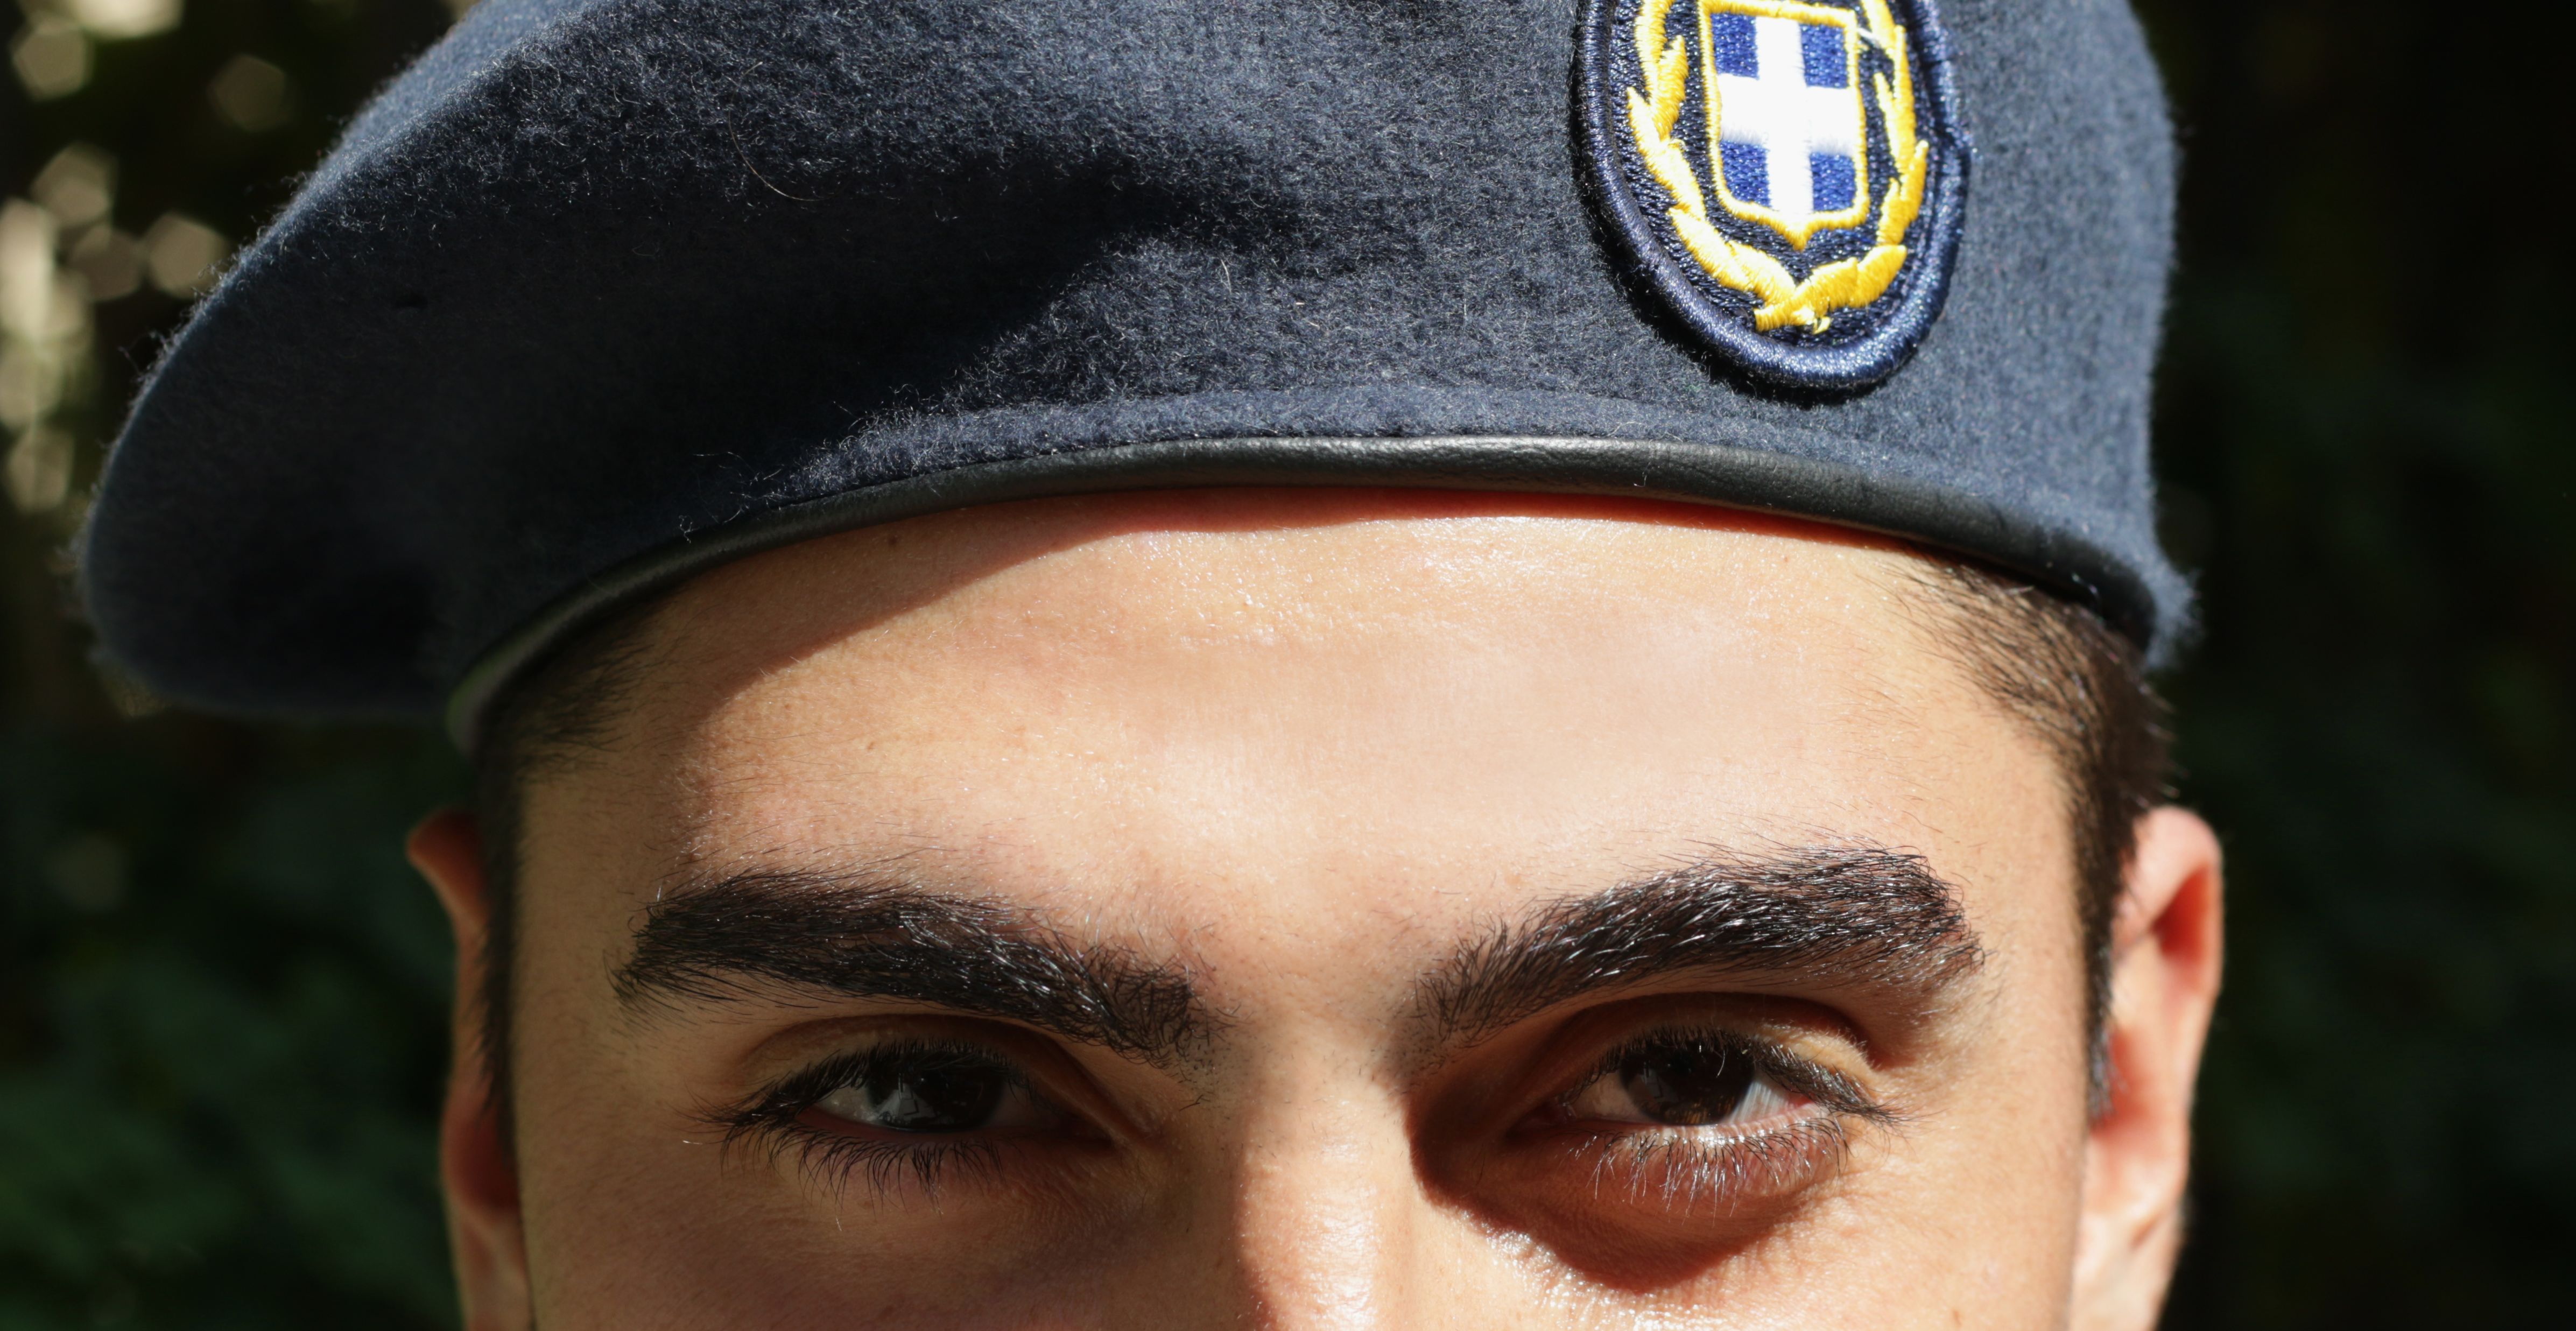 Meet the Fantaros: Greece's soldiers of good fortune